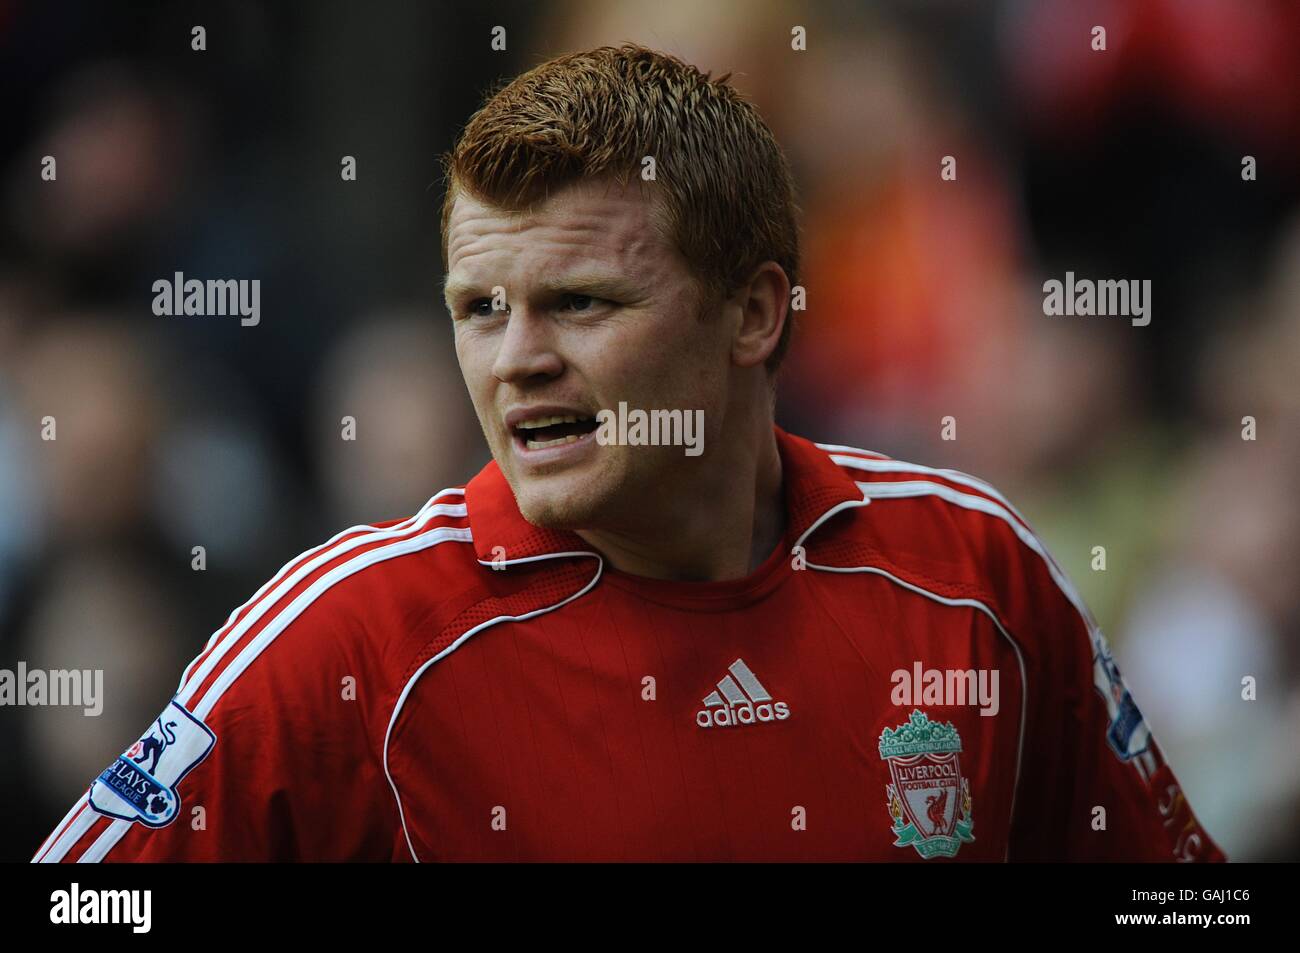 Football - Barclays Premier League - Liverpool / Middlesbrough - Anfield. John Arne Riise, Liverpool Banque D'Images